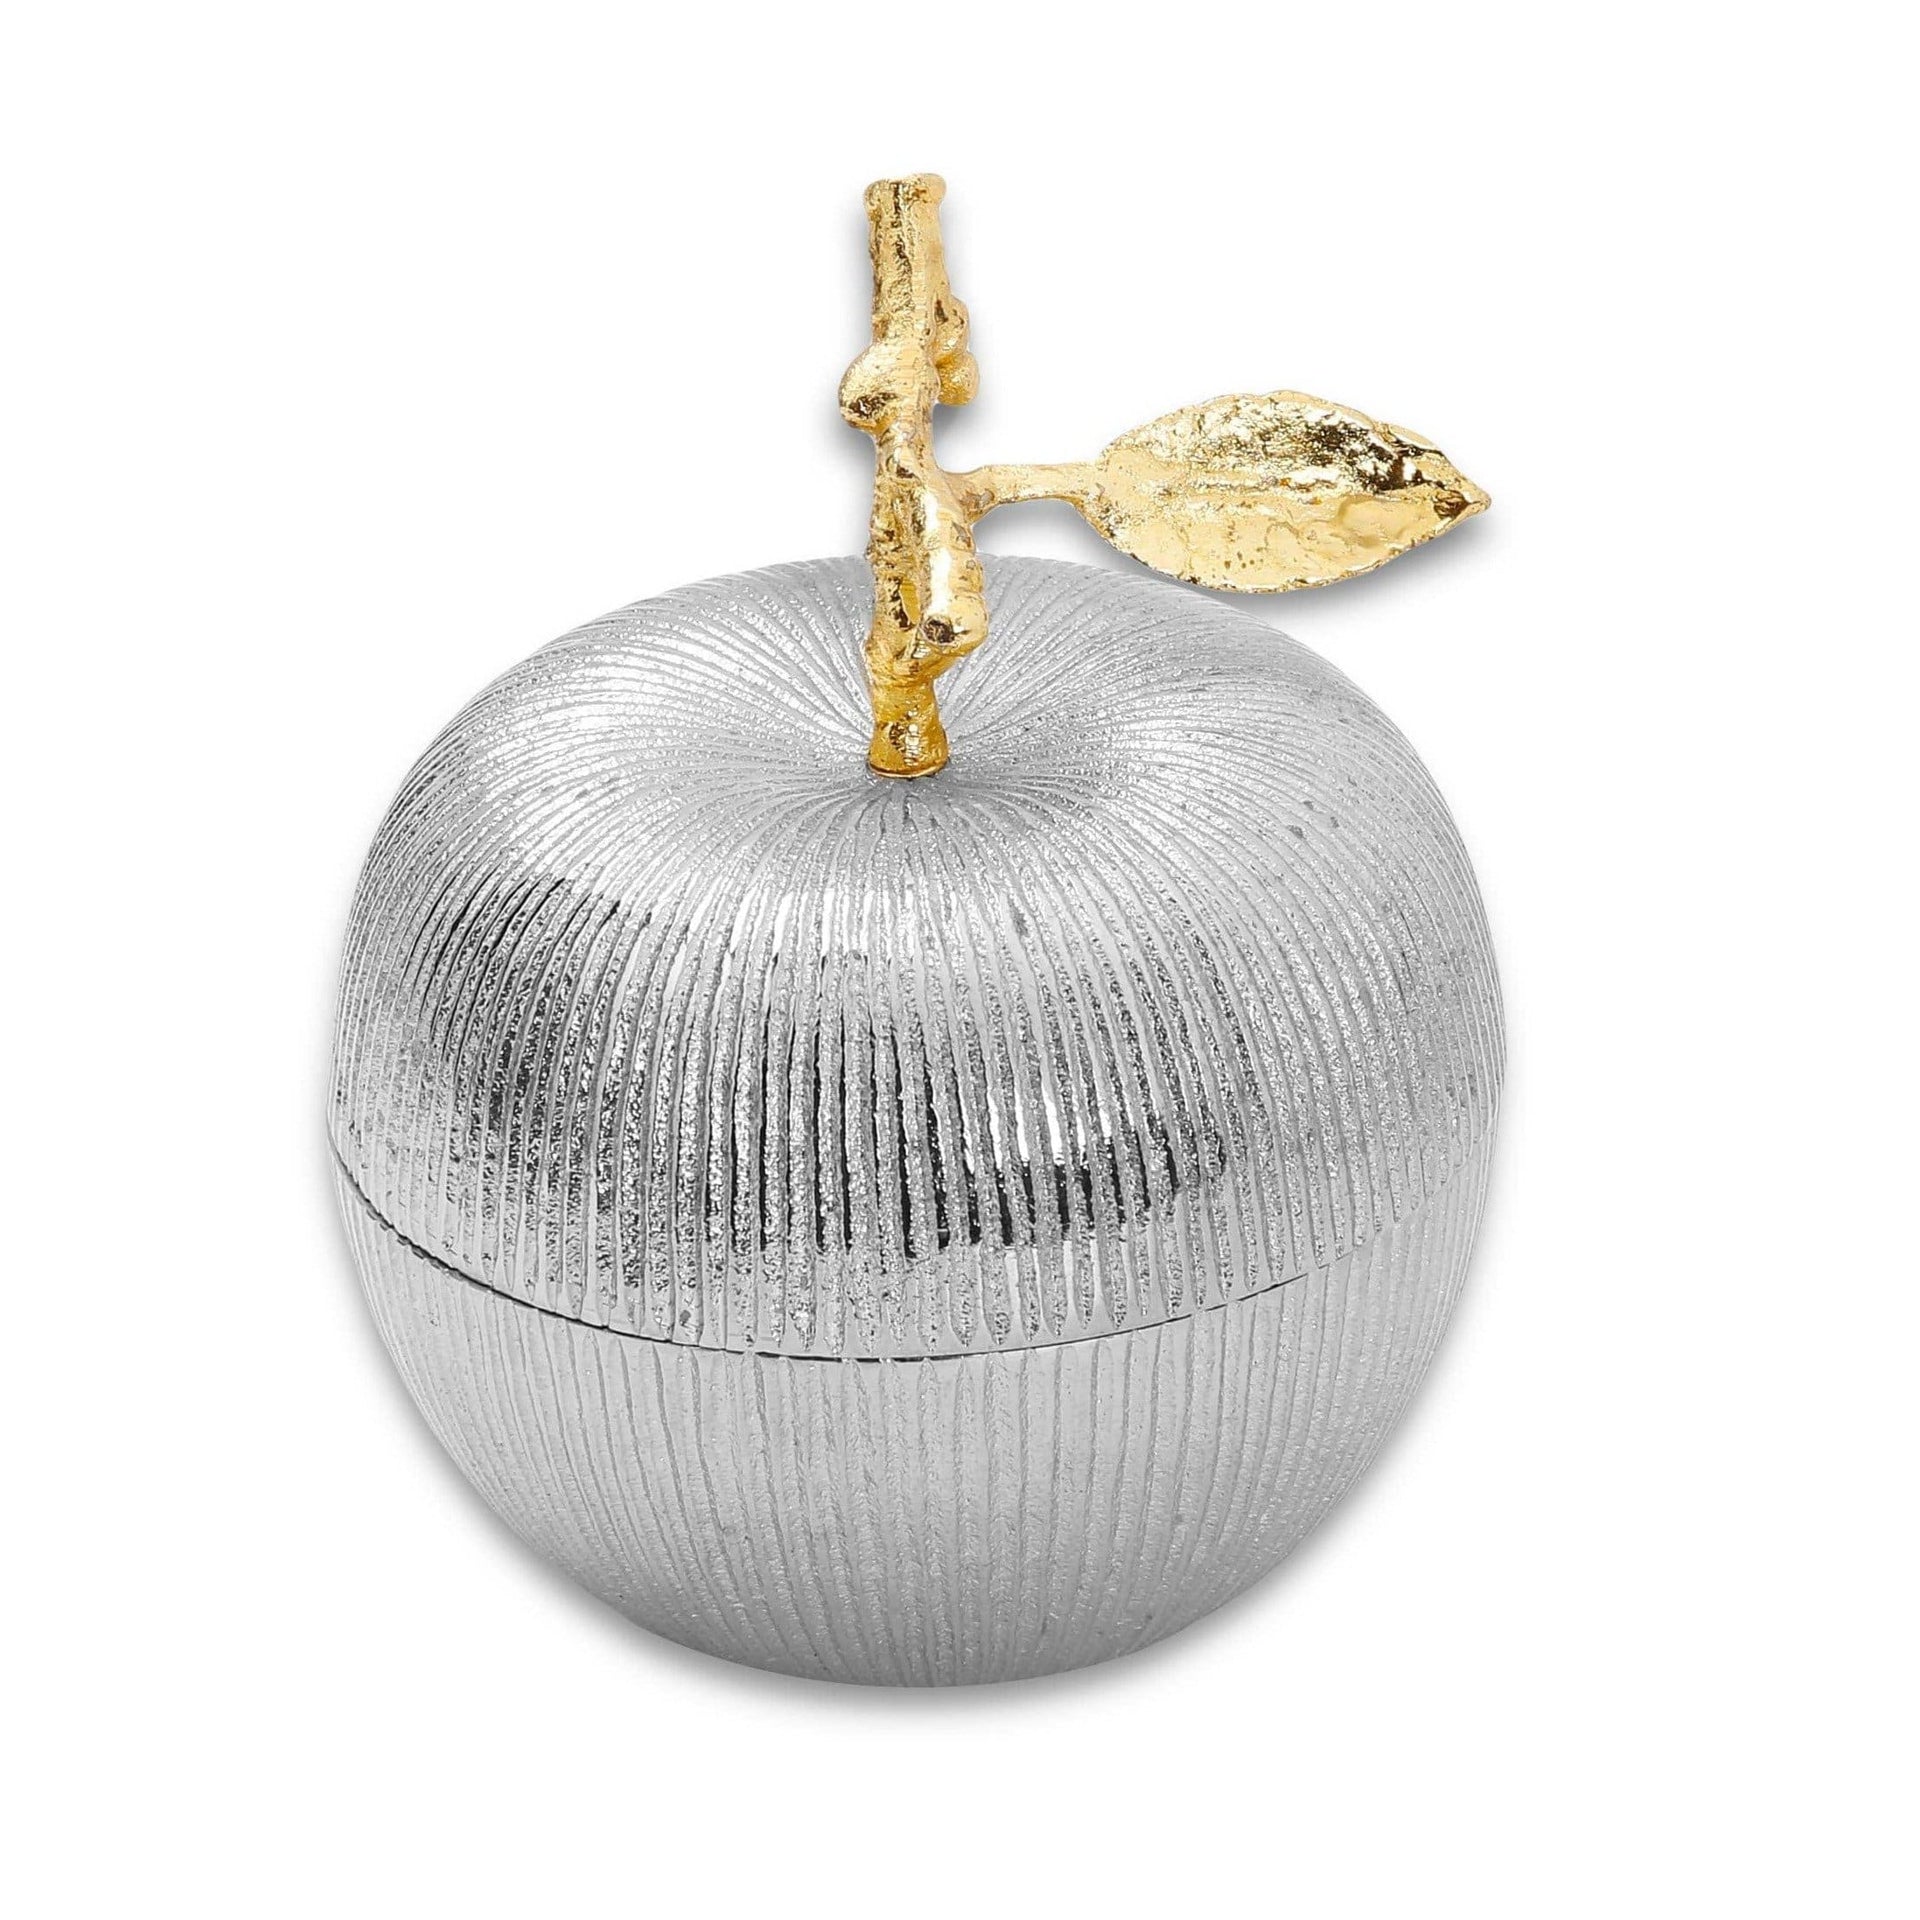 Classic Touch Decor Honey Dishes Large Silver Apple-Shaped Jar